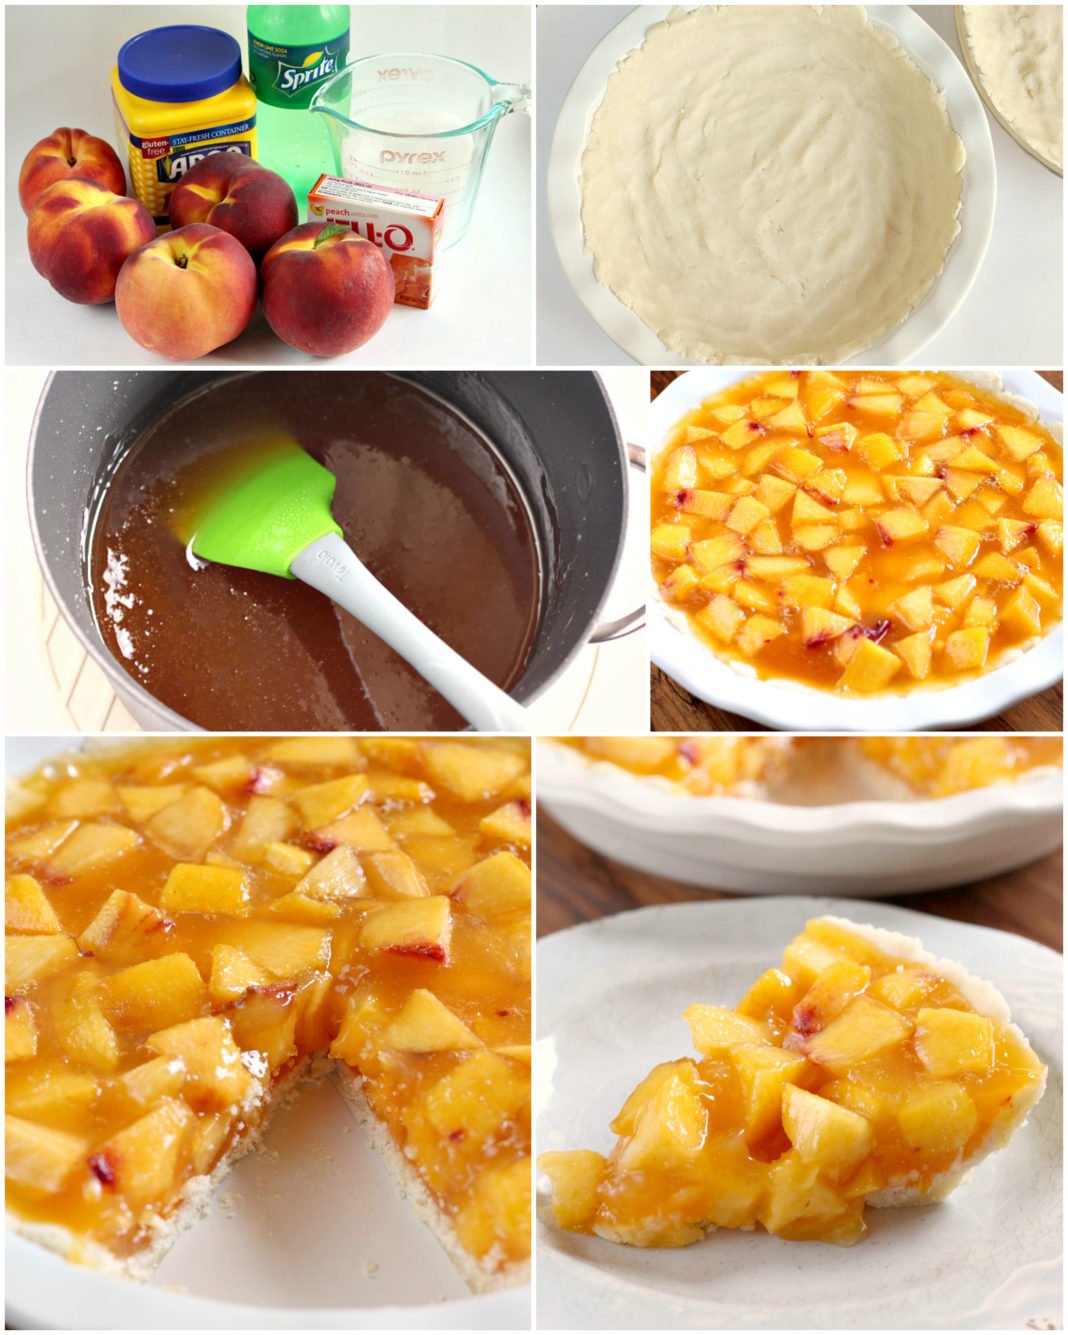 Step by step photos and instructions on how to make Easy Peach Pie. Lots of fresh peaches and a few other simple ingredients, including Sprite! 